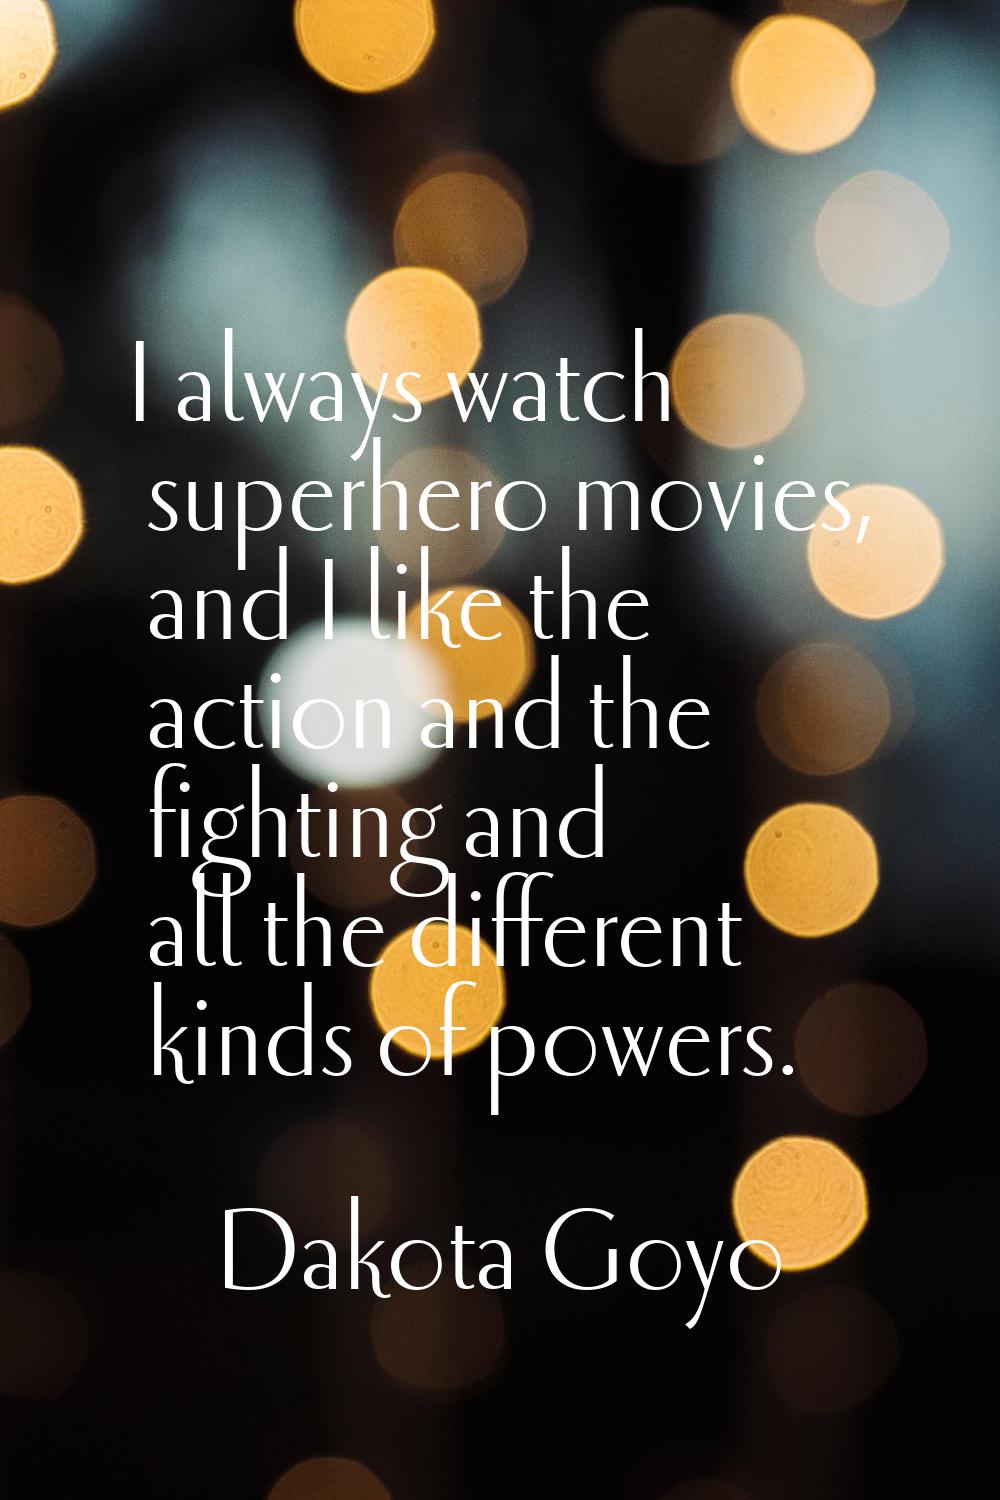 I always watch superhero movies, and I like the action and the fighting and all the different kinds